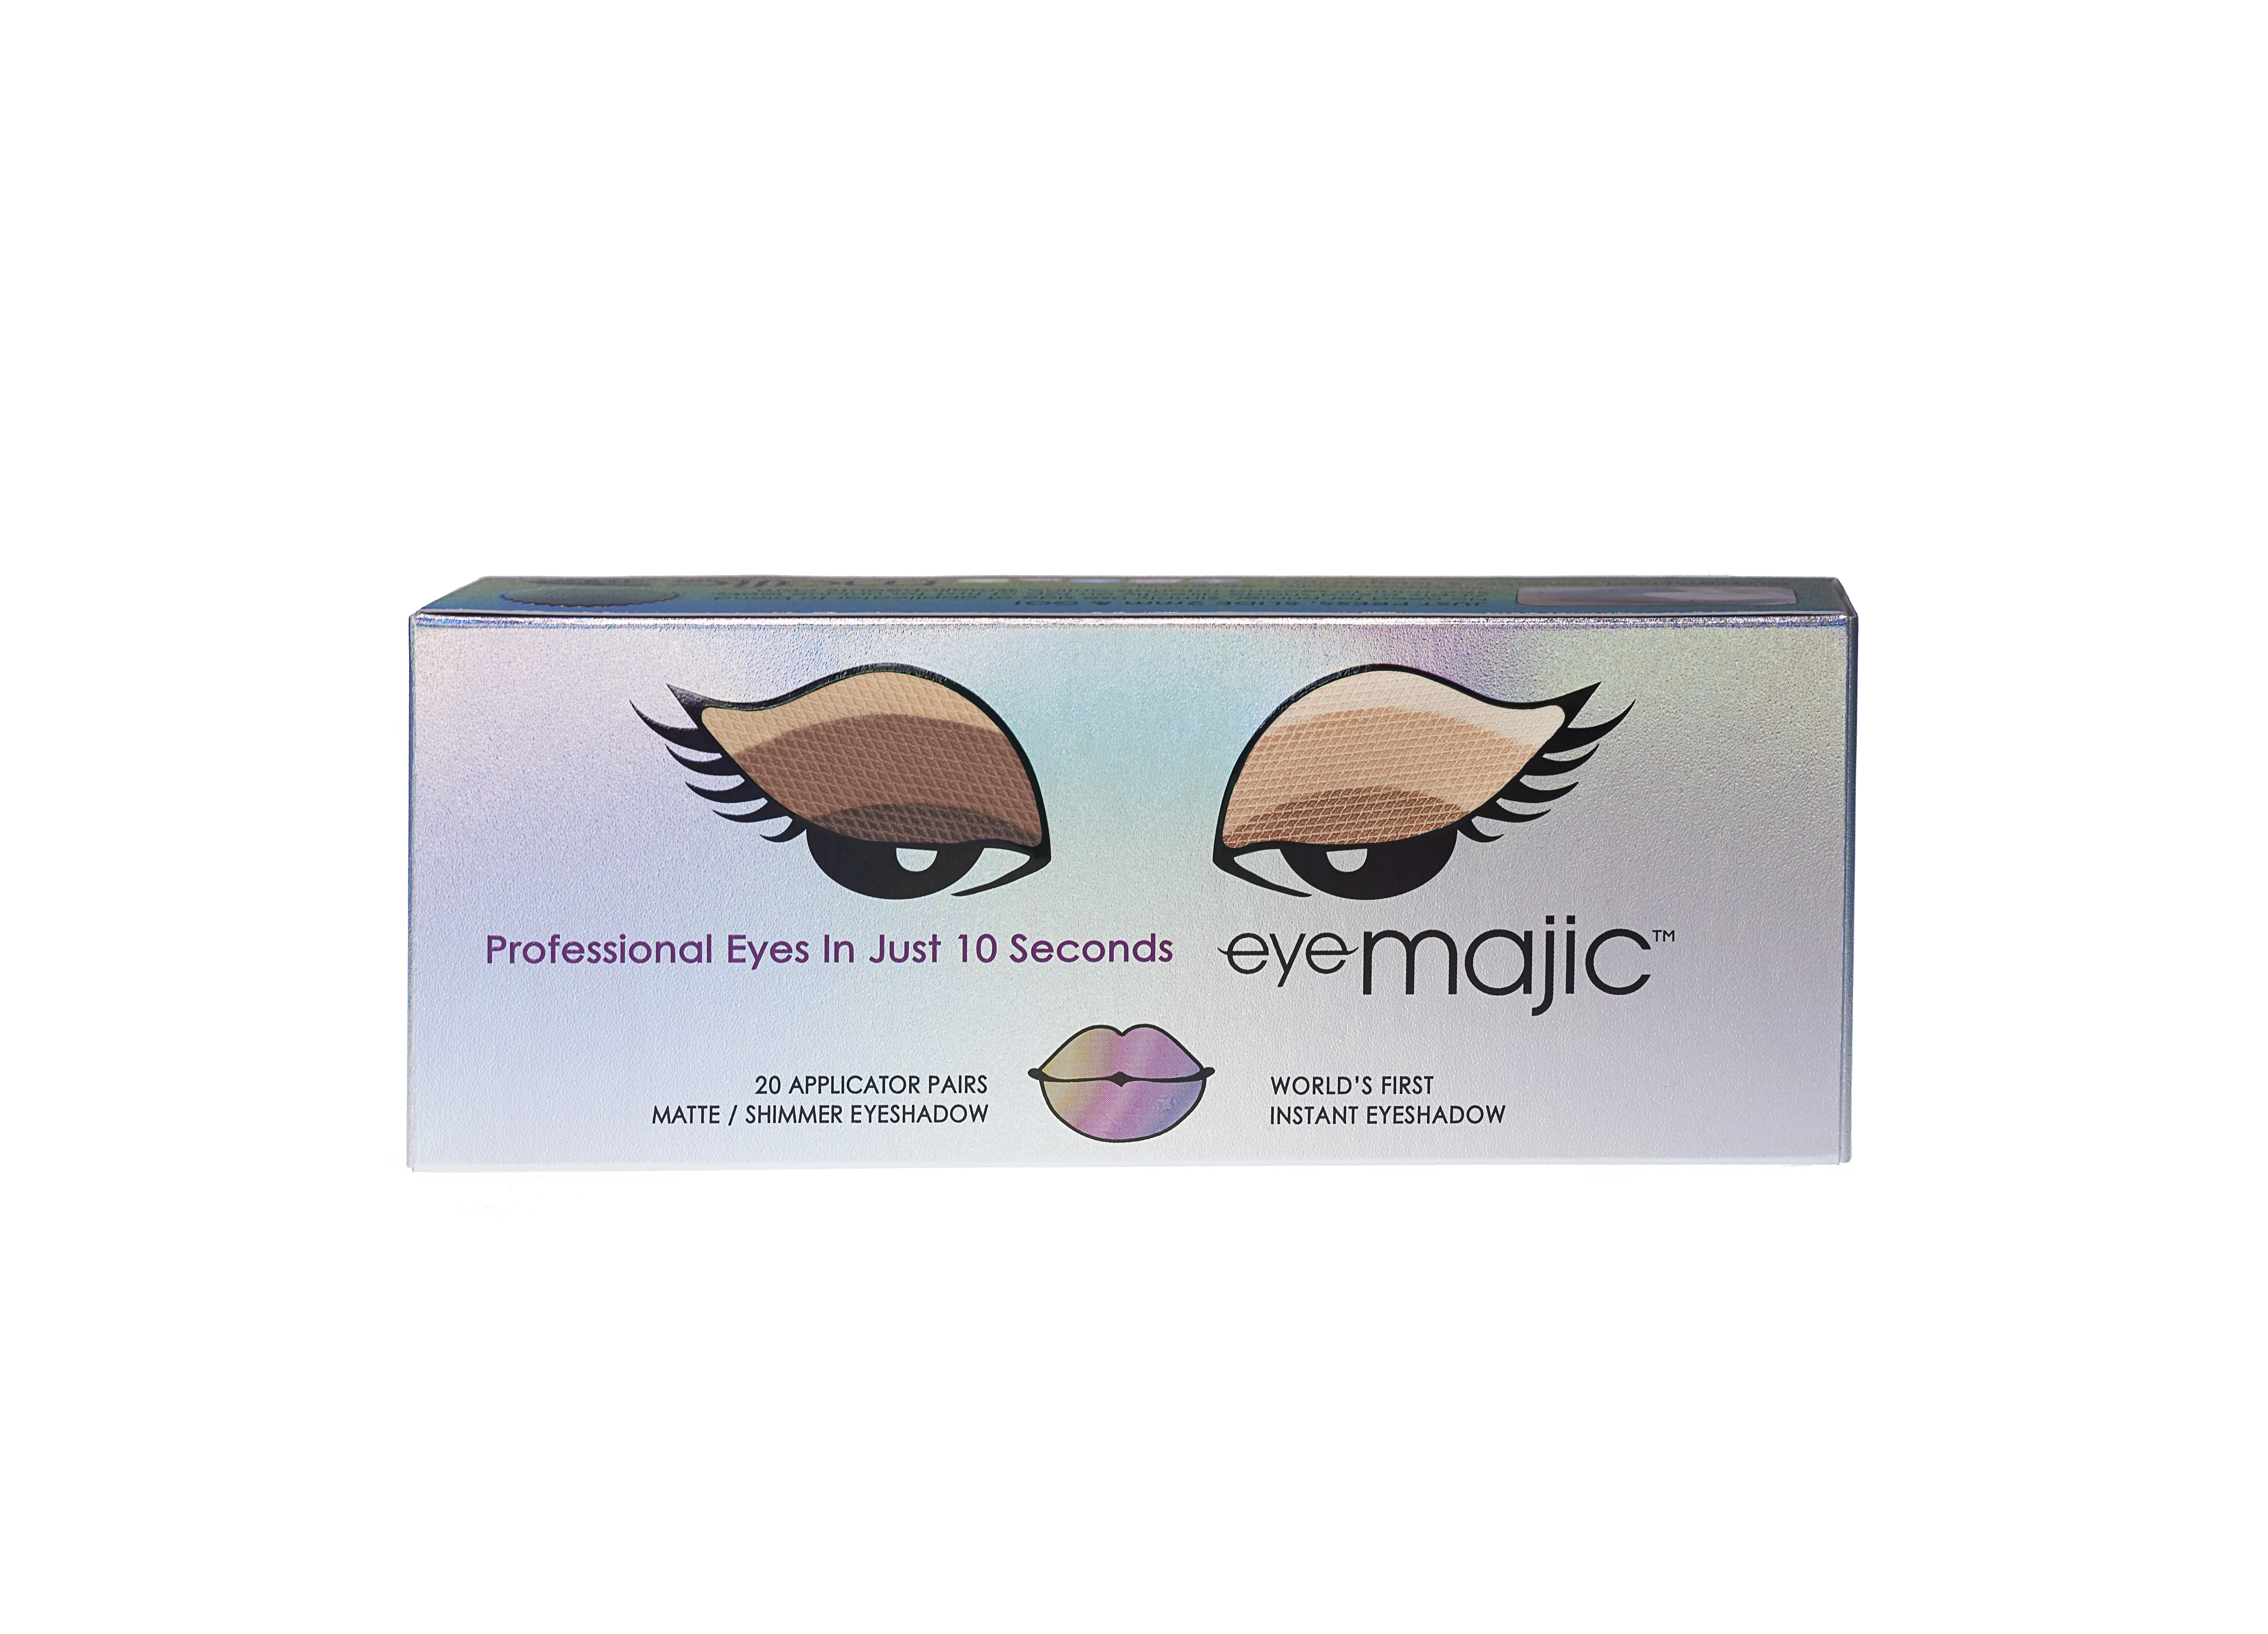 Eye Majic Instant Eyeshadow – Easy Professional Makeup in just 10 Seconds!